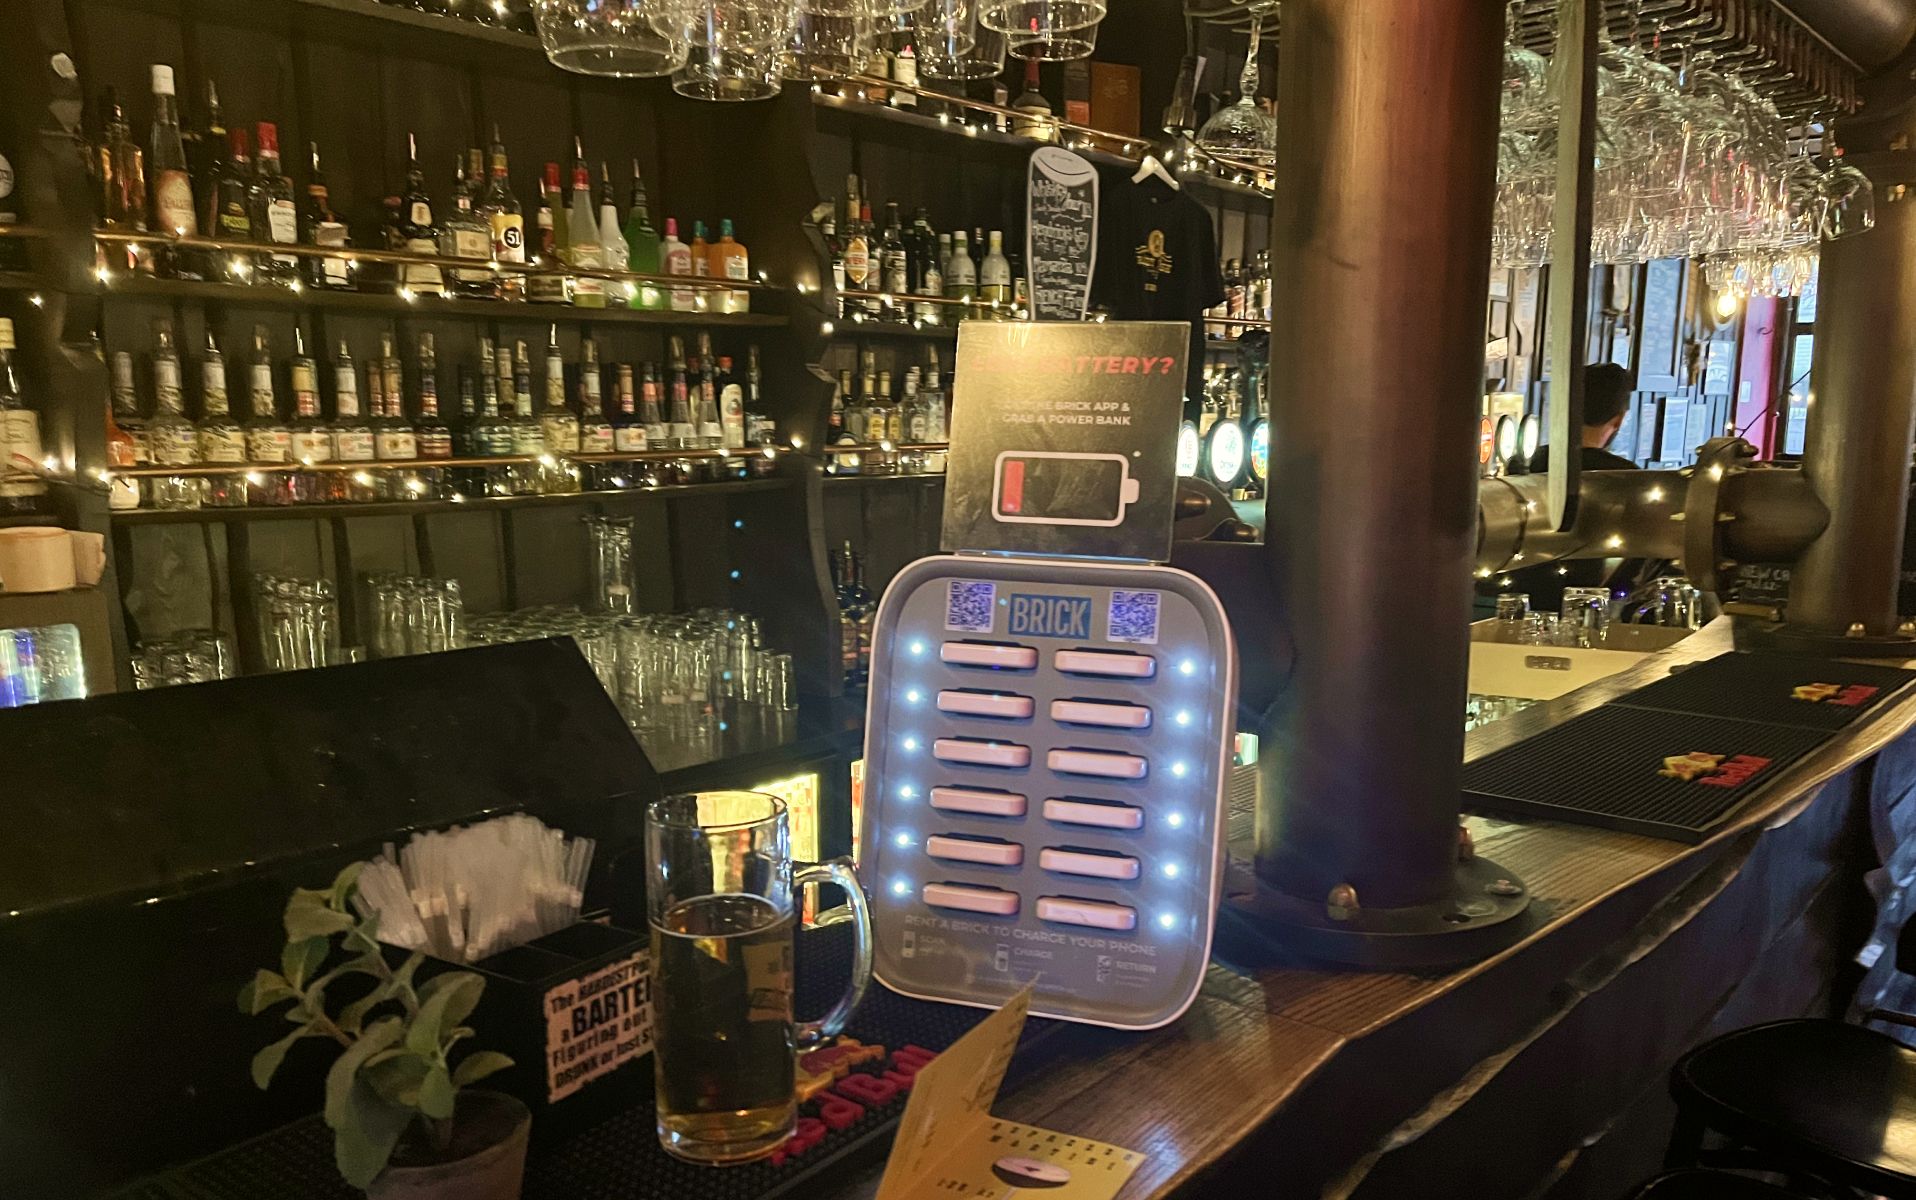 The grey 12 slot Brick powerbank sharing station on the bar at Crazy Horse with a shelf of bottles in the background